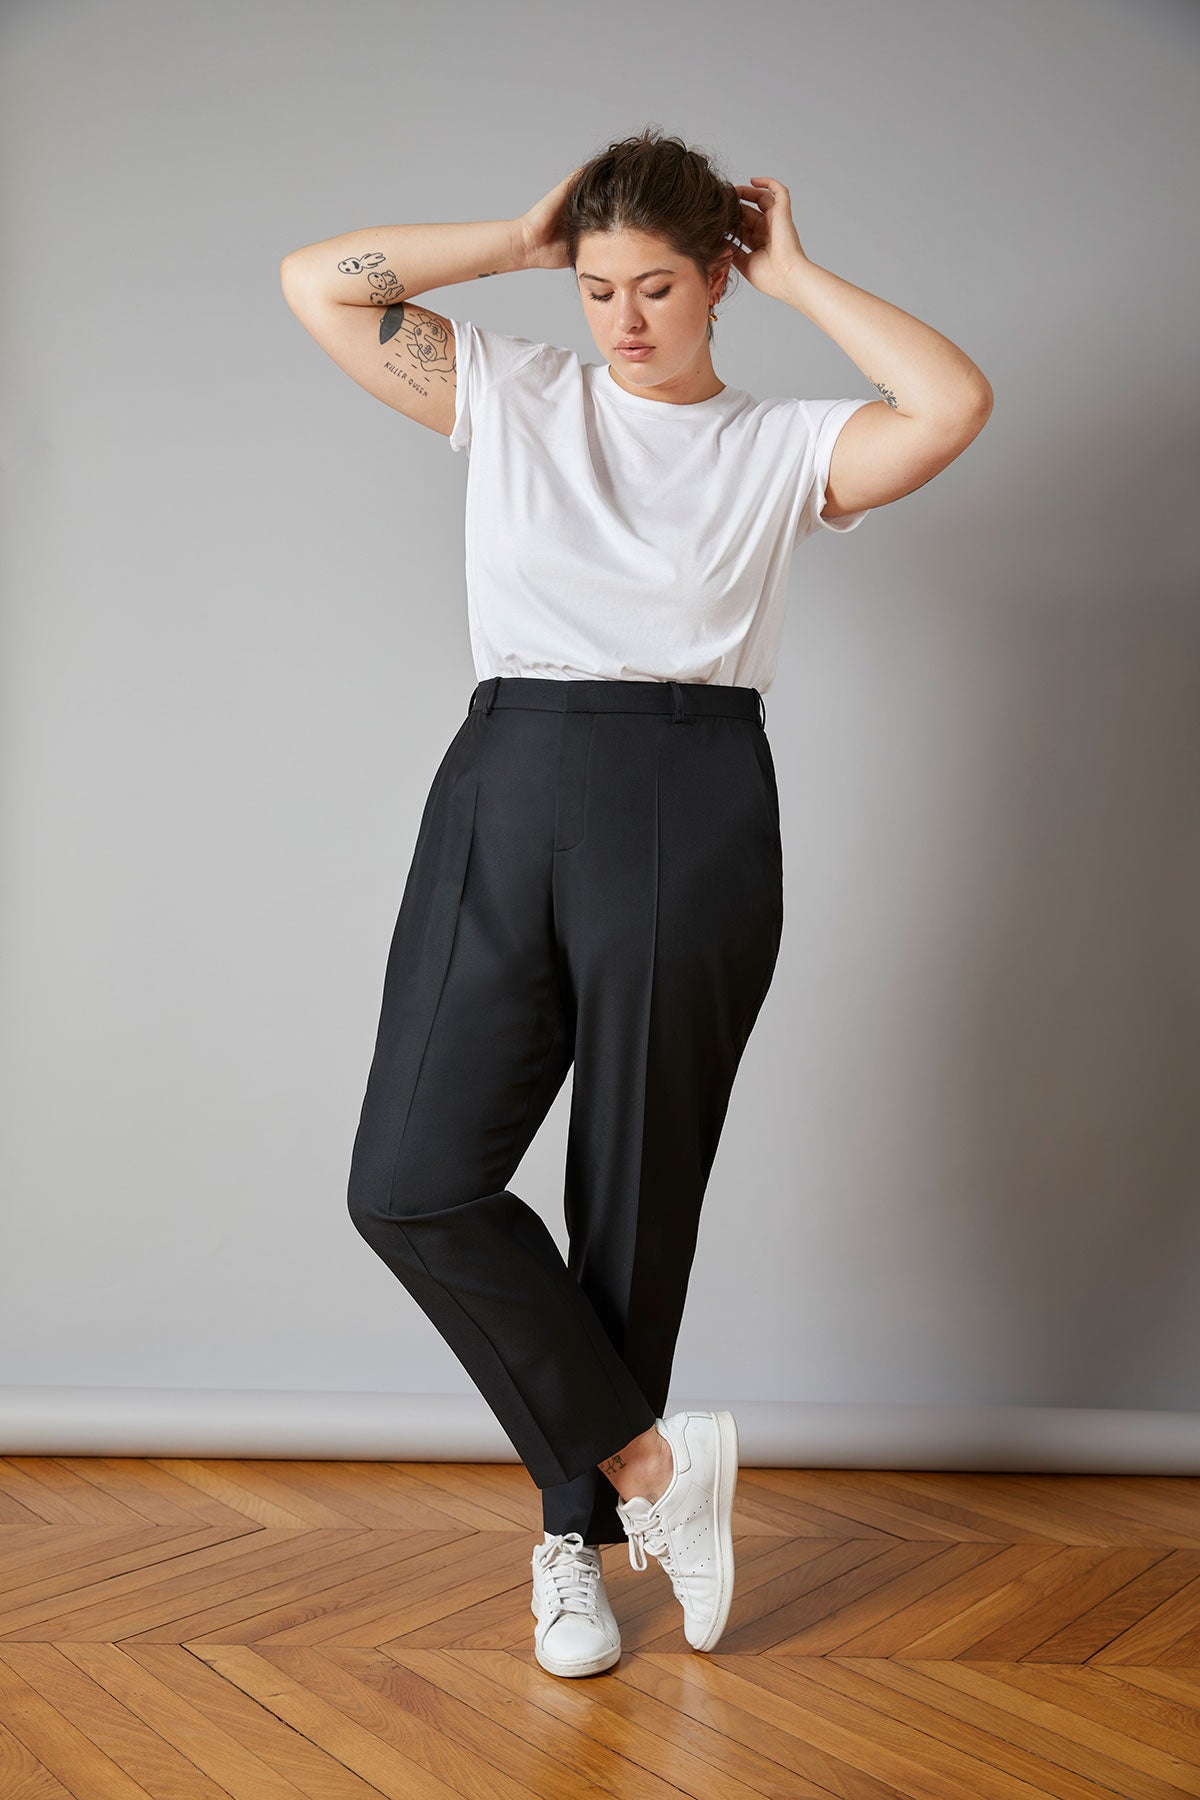 CLASSIC FIT TROUSERS